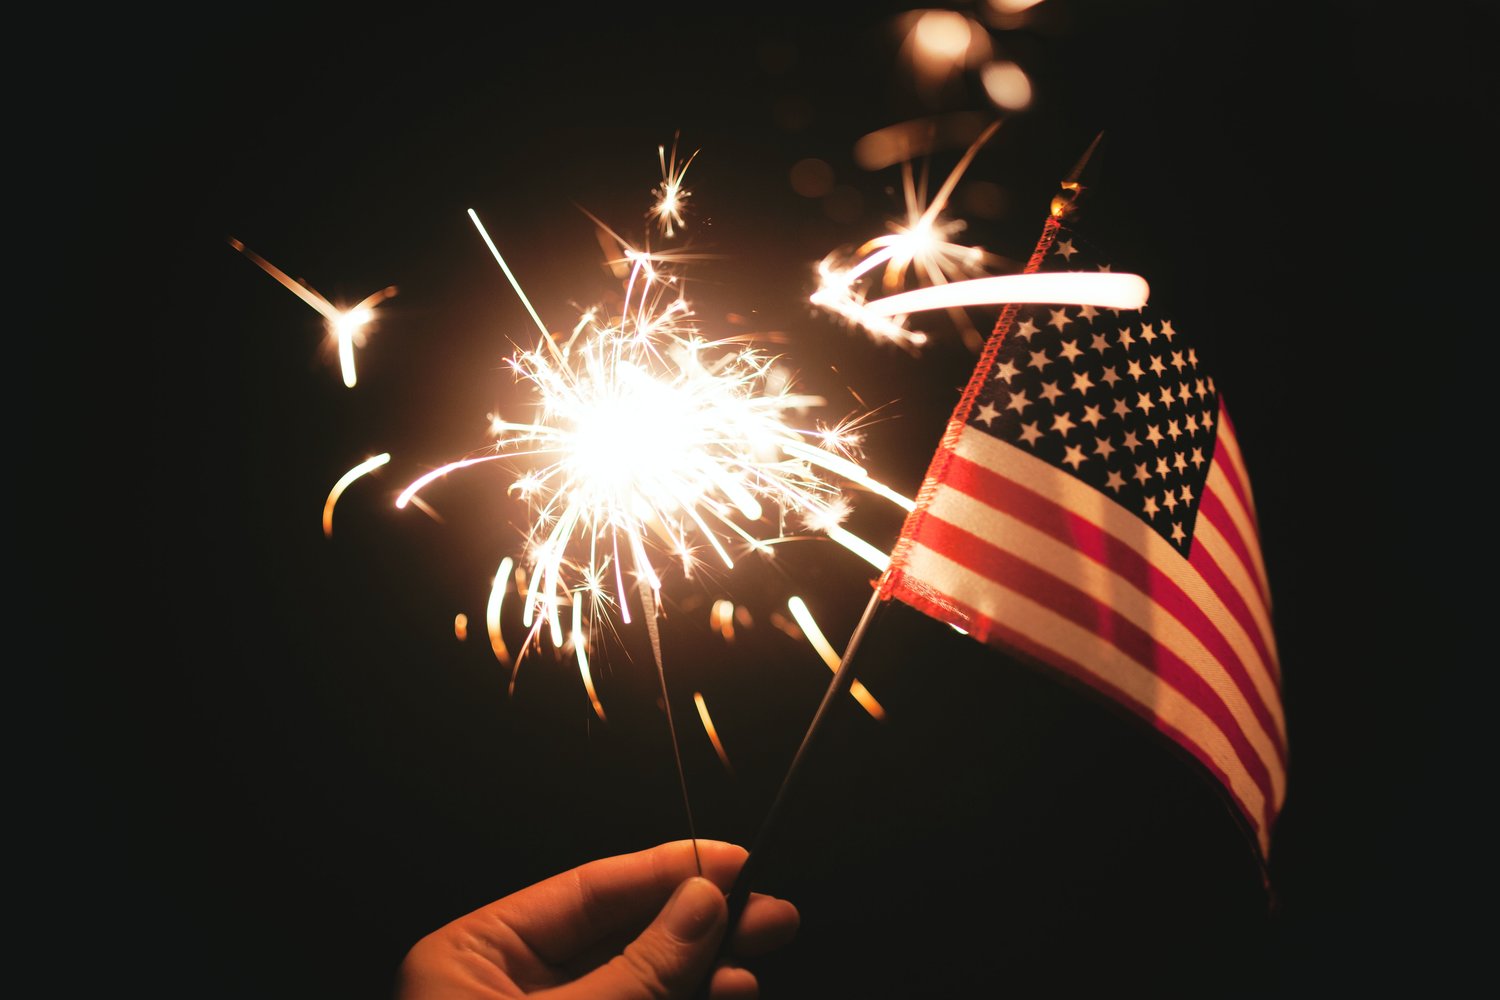 Fayetteville, Fort Bragg, Hope Mills to celebrate July 4th with music, fireworks